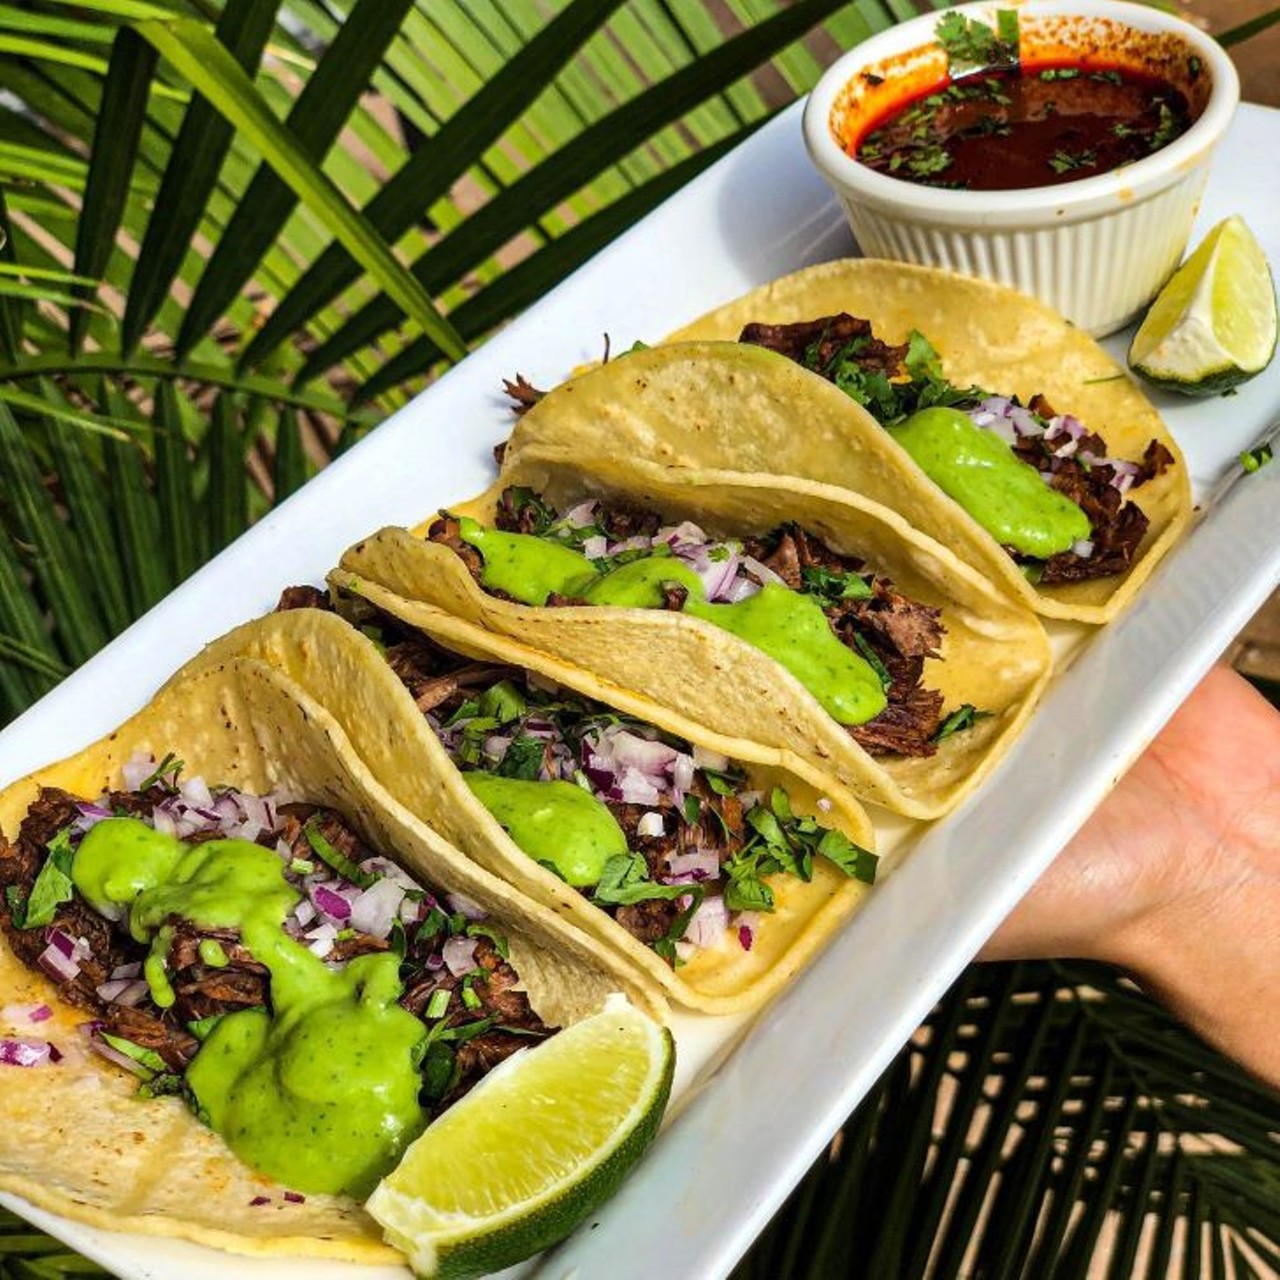 La Herradura  
12701 S. John Young Parkway
La Herradura provides guests &#147;an experience that will delight all your senses&#148; with live music every weekend and authentic Mexican dishes, including their fish and pork carnitas tacos. 
Photo via La Herradura Mexican Restaurant/Facebook